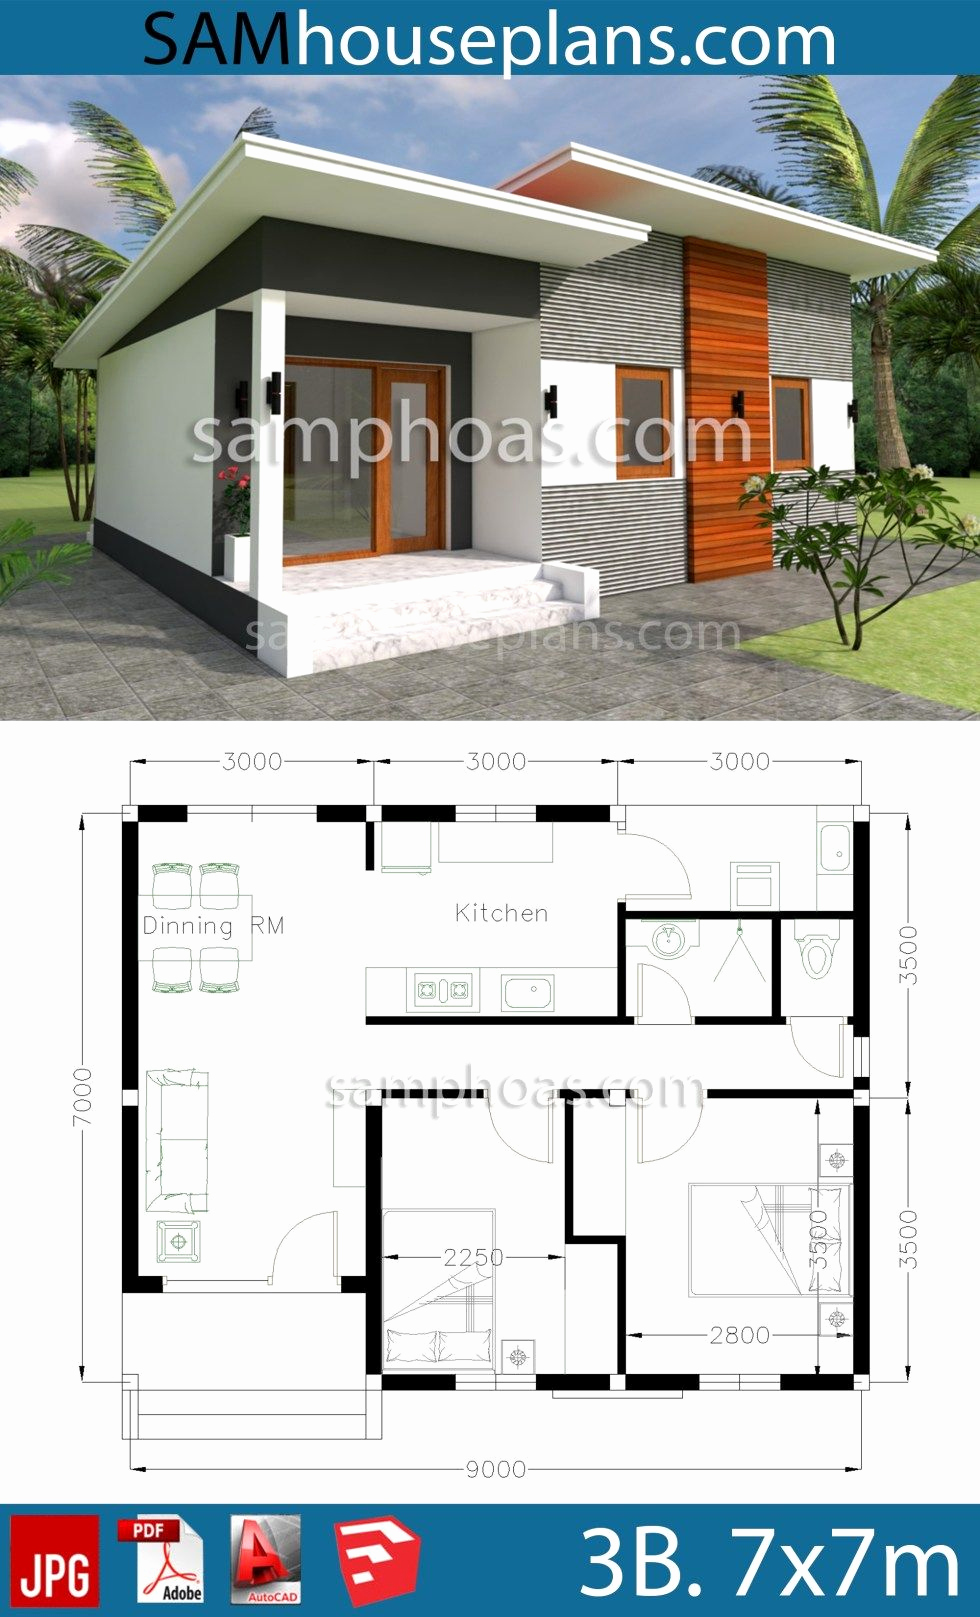 2 Bedroom House Plans New House Plans 9x7m with 2 Bedrooms